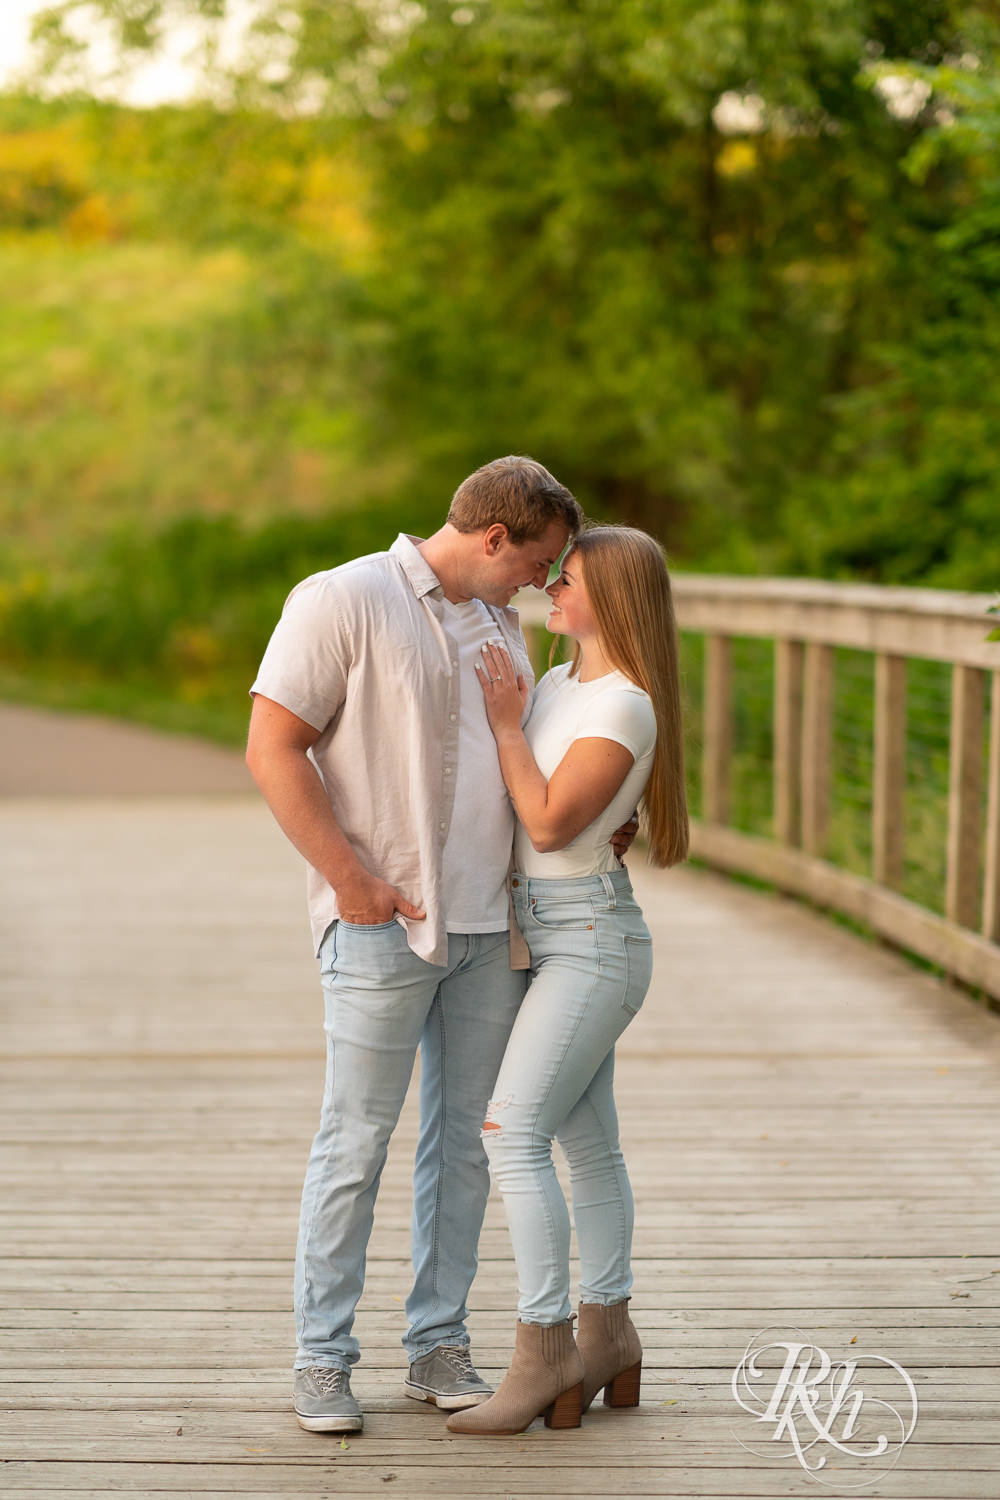 Man and woman in jeans laugh on smile during golden hour engagement photography in Eagan, Minnesota.